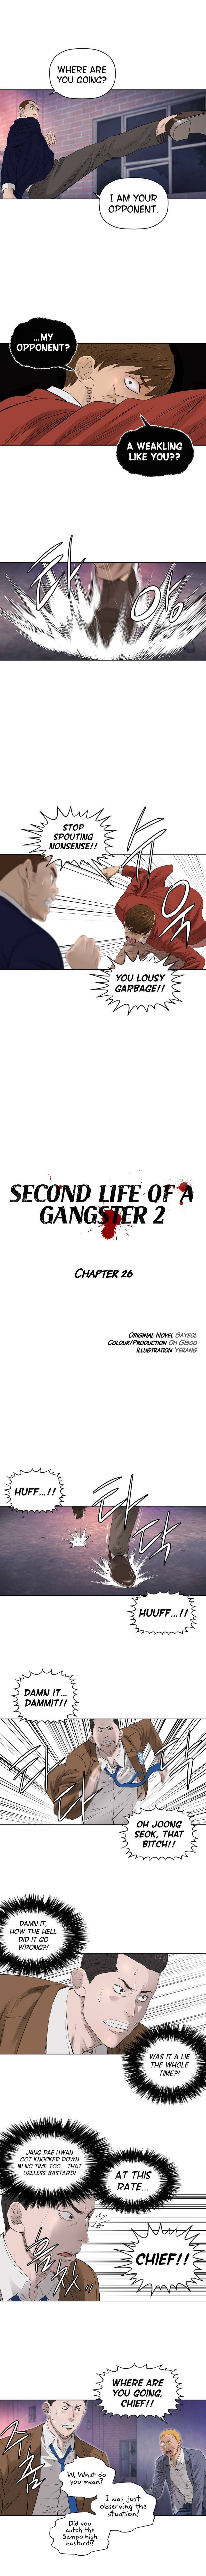 Second Life Of A Gangster - Page 3